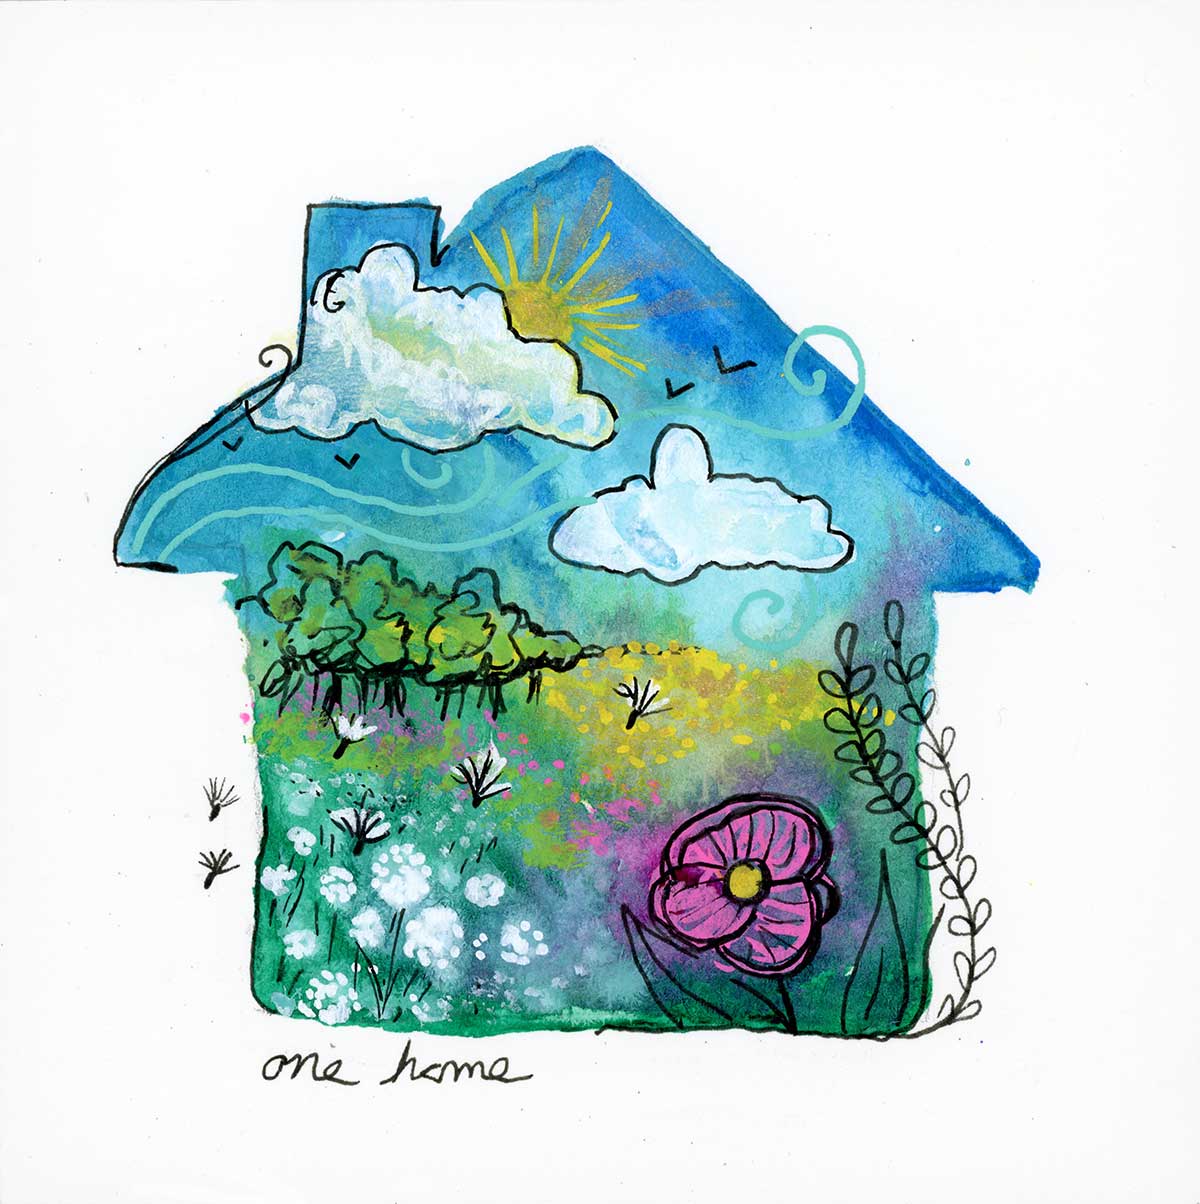 One Home, 4" x 4", mixed media